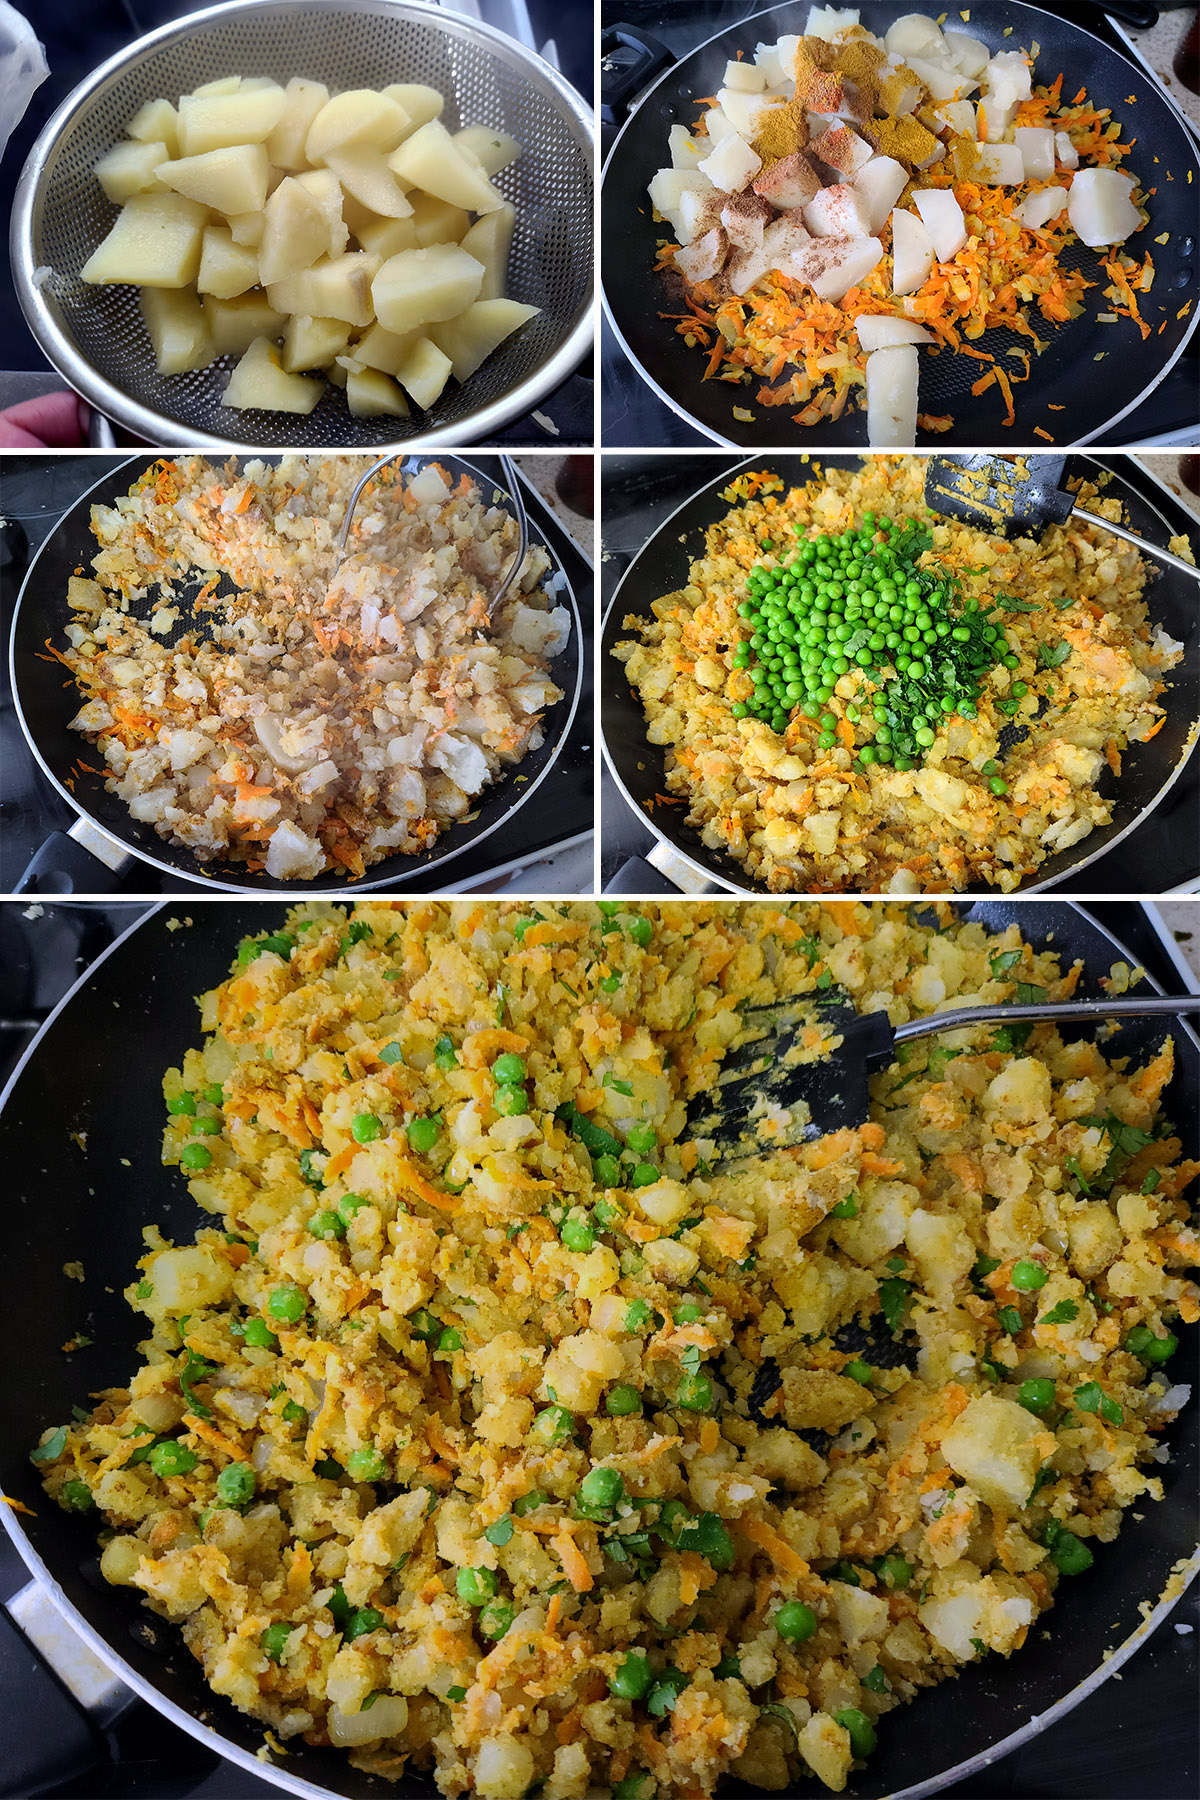 A 5 part image showing potatoes, spices, and peas being added to the filling and mixed together.